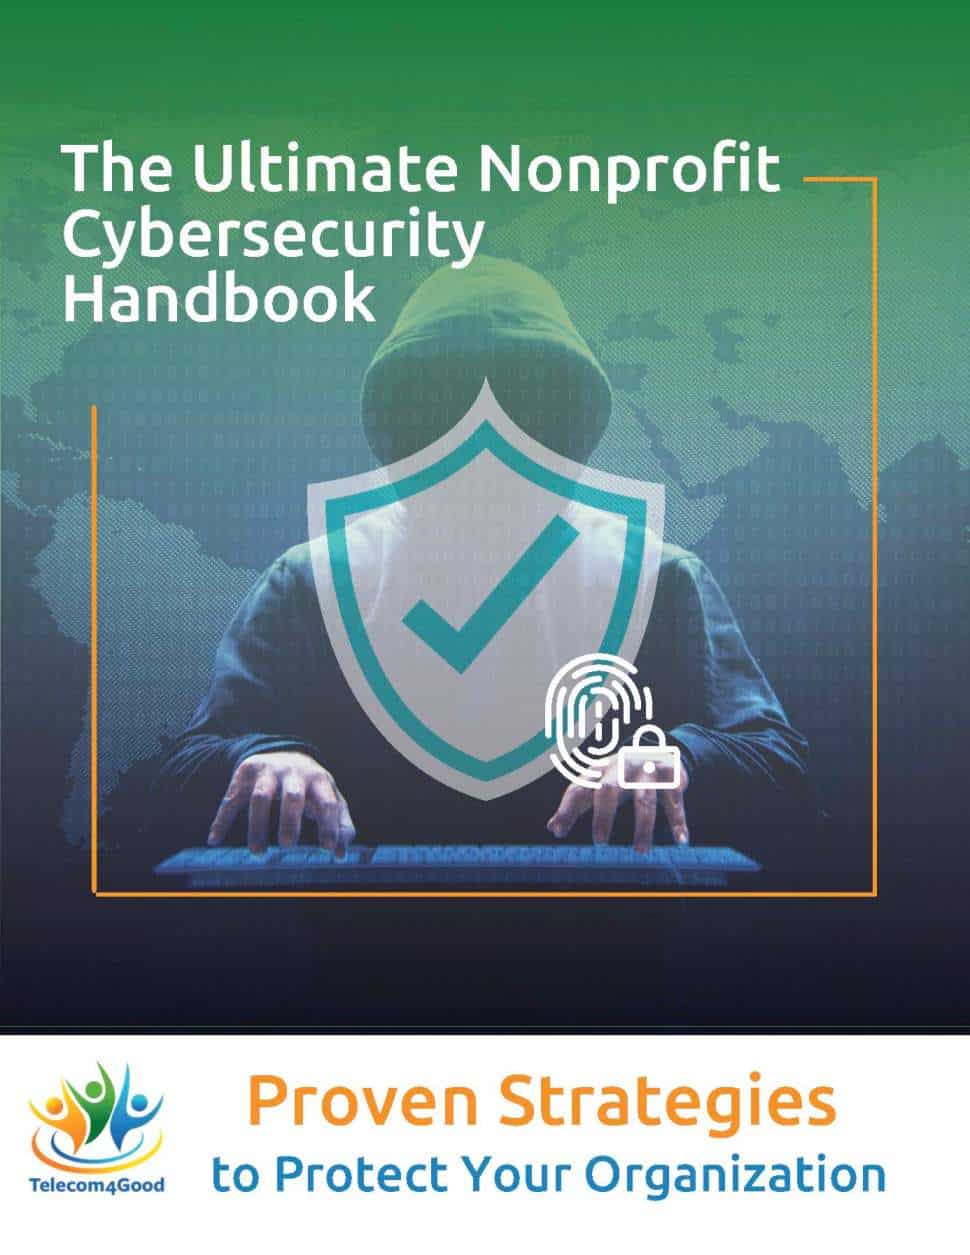 The Ultimate Nonprofit Cybersecurity Handbook Part1